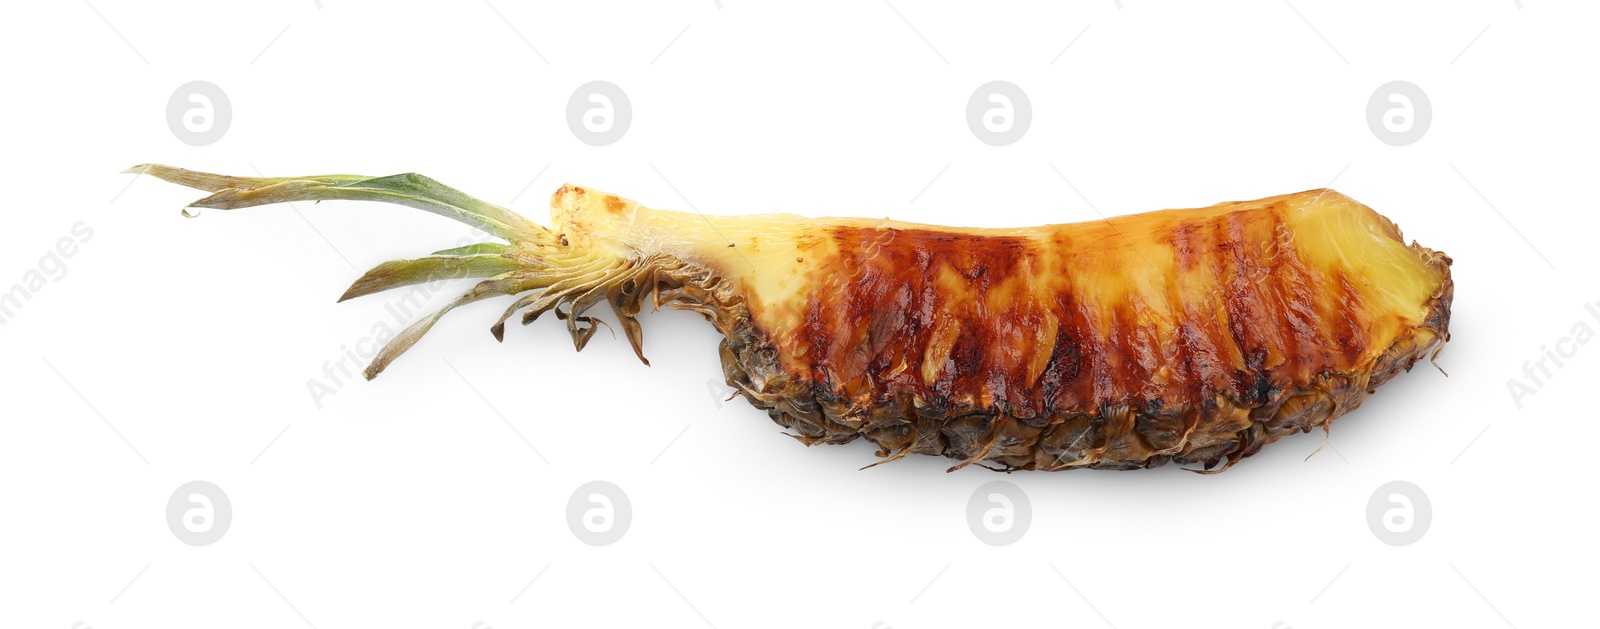 Photo of Piece of tasty grilled pineapple isolated on white background